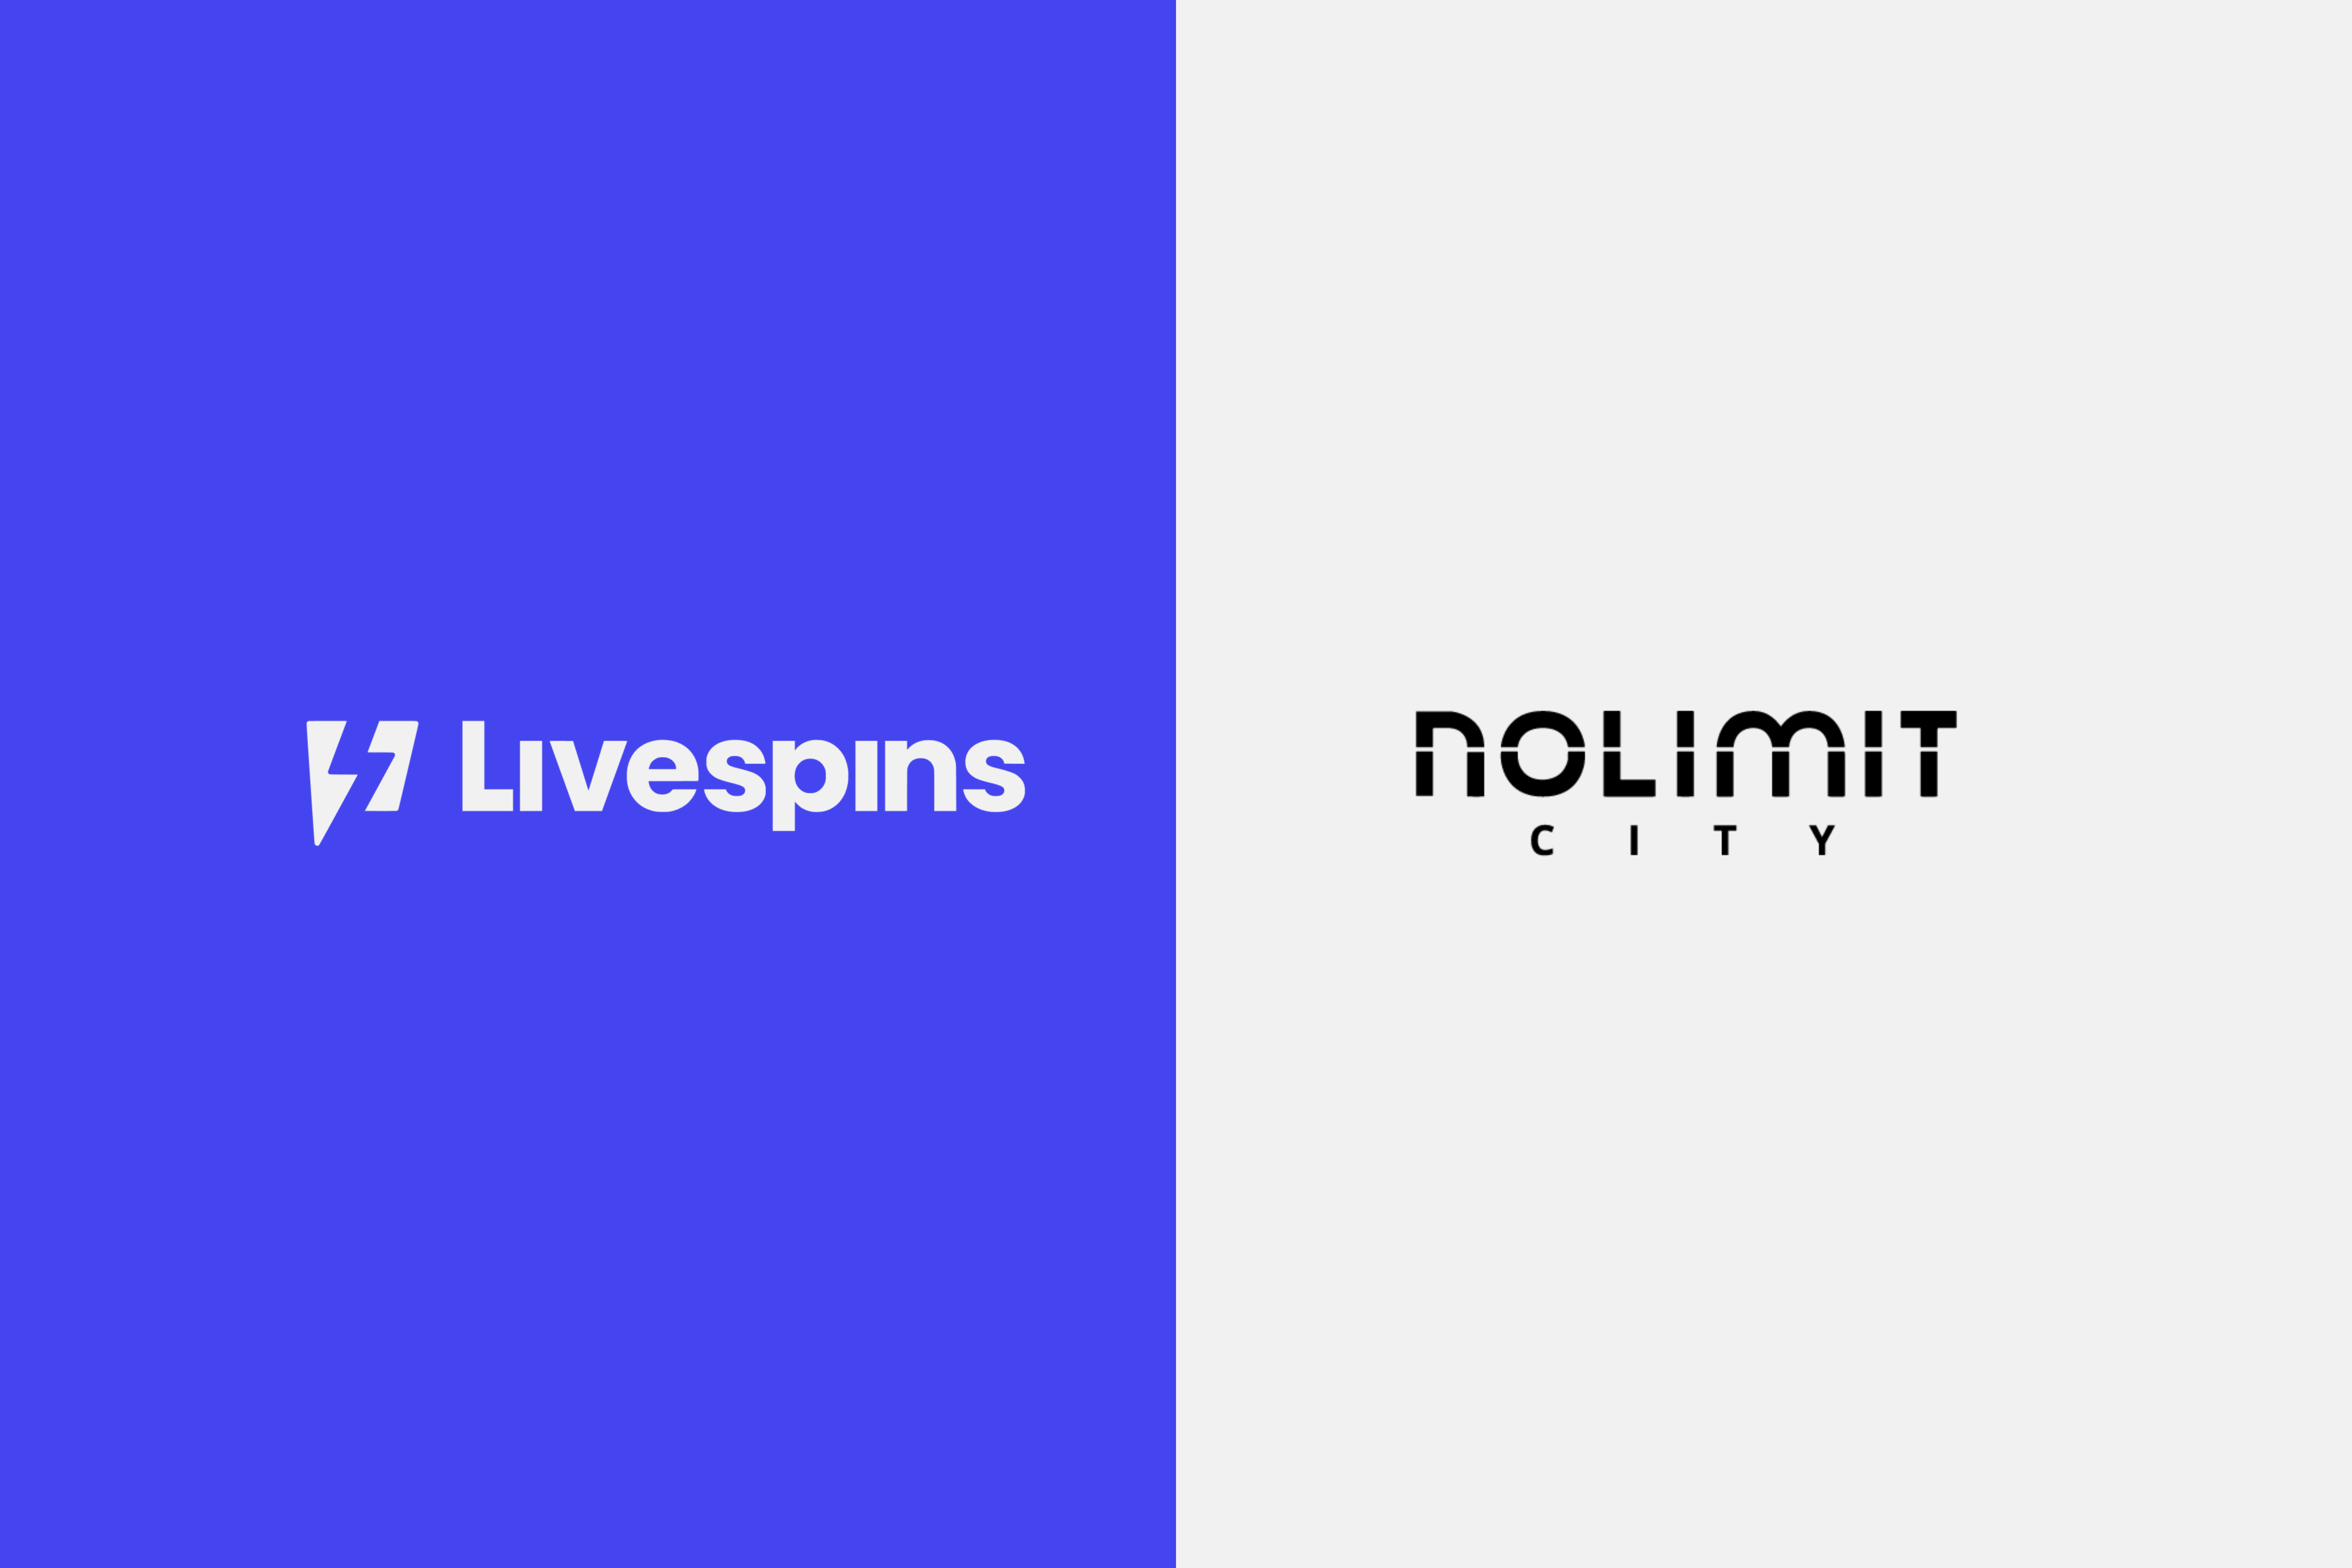 On the limit: Livespins joins forces with Nolimit City